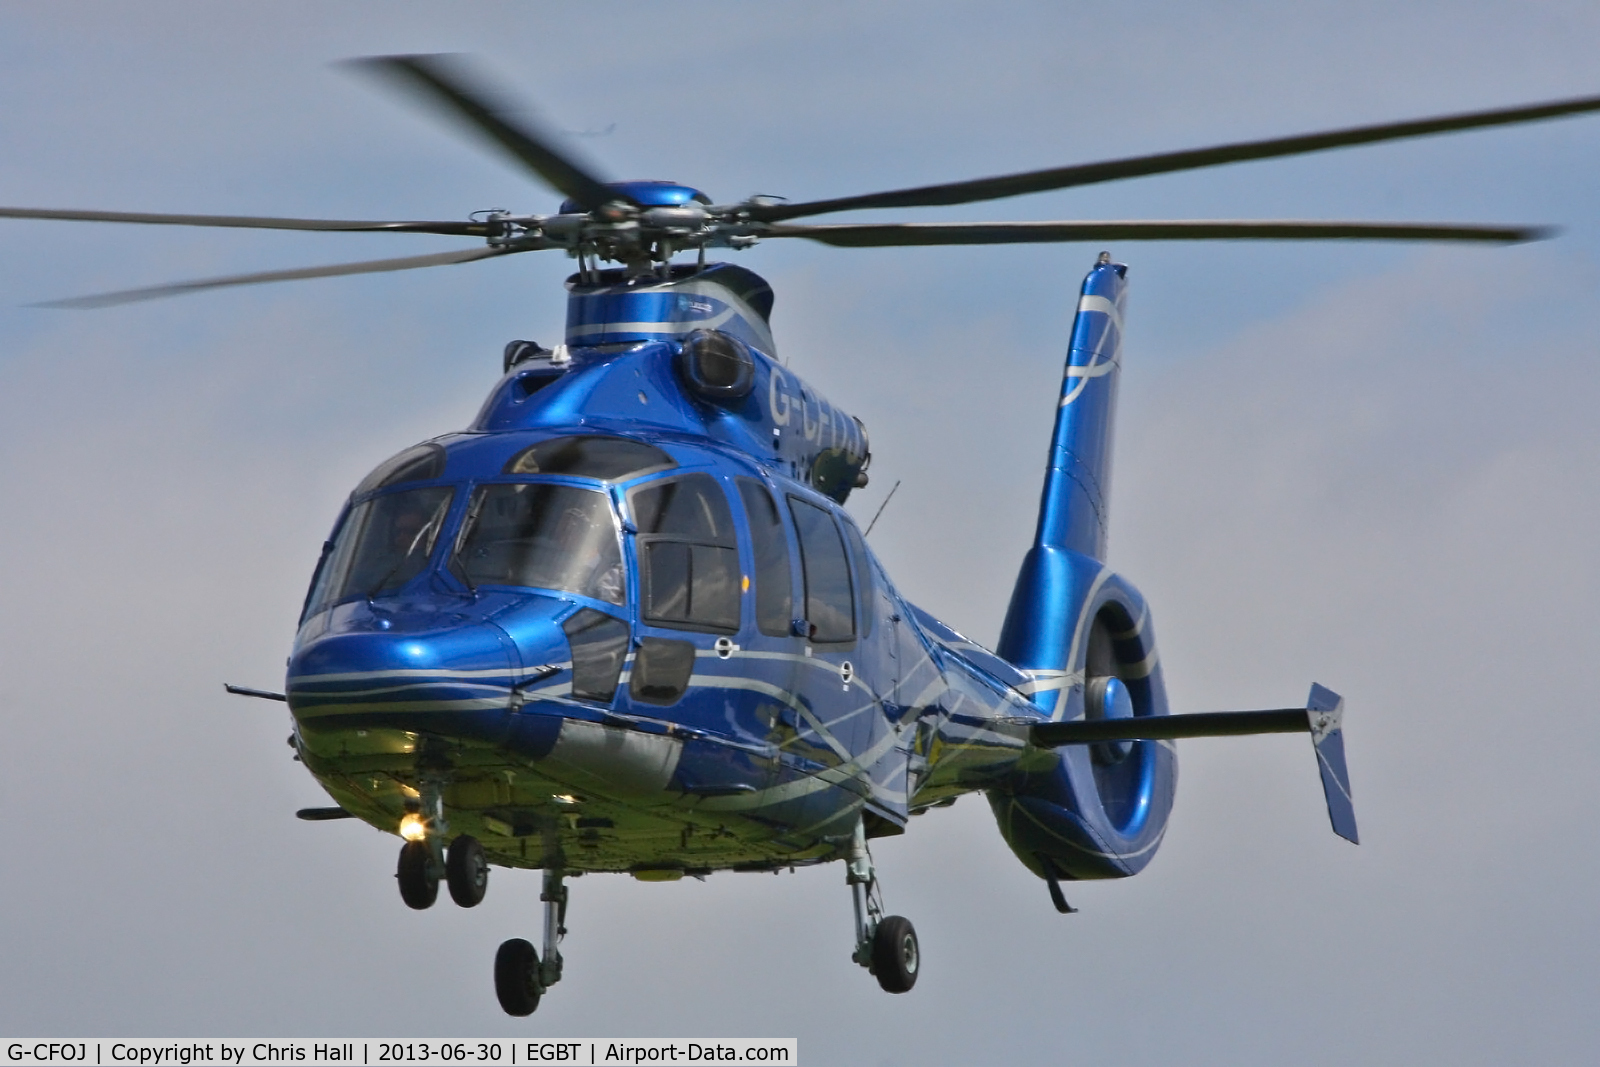 G-CFOJ, 2009 Eurocopter EC-155B-1 C/N 6852, being used for ferrying race fans to the British F1 Grand Prix at Silverstone